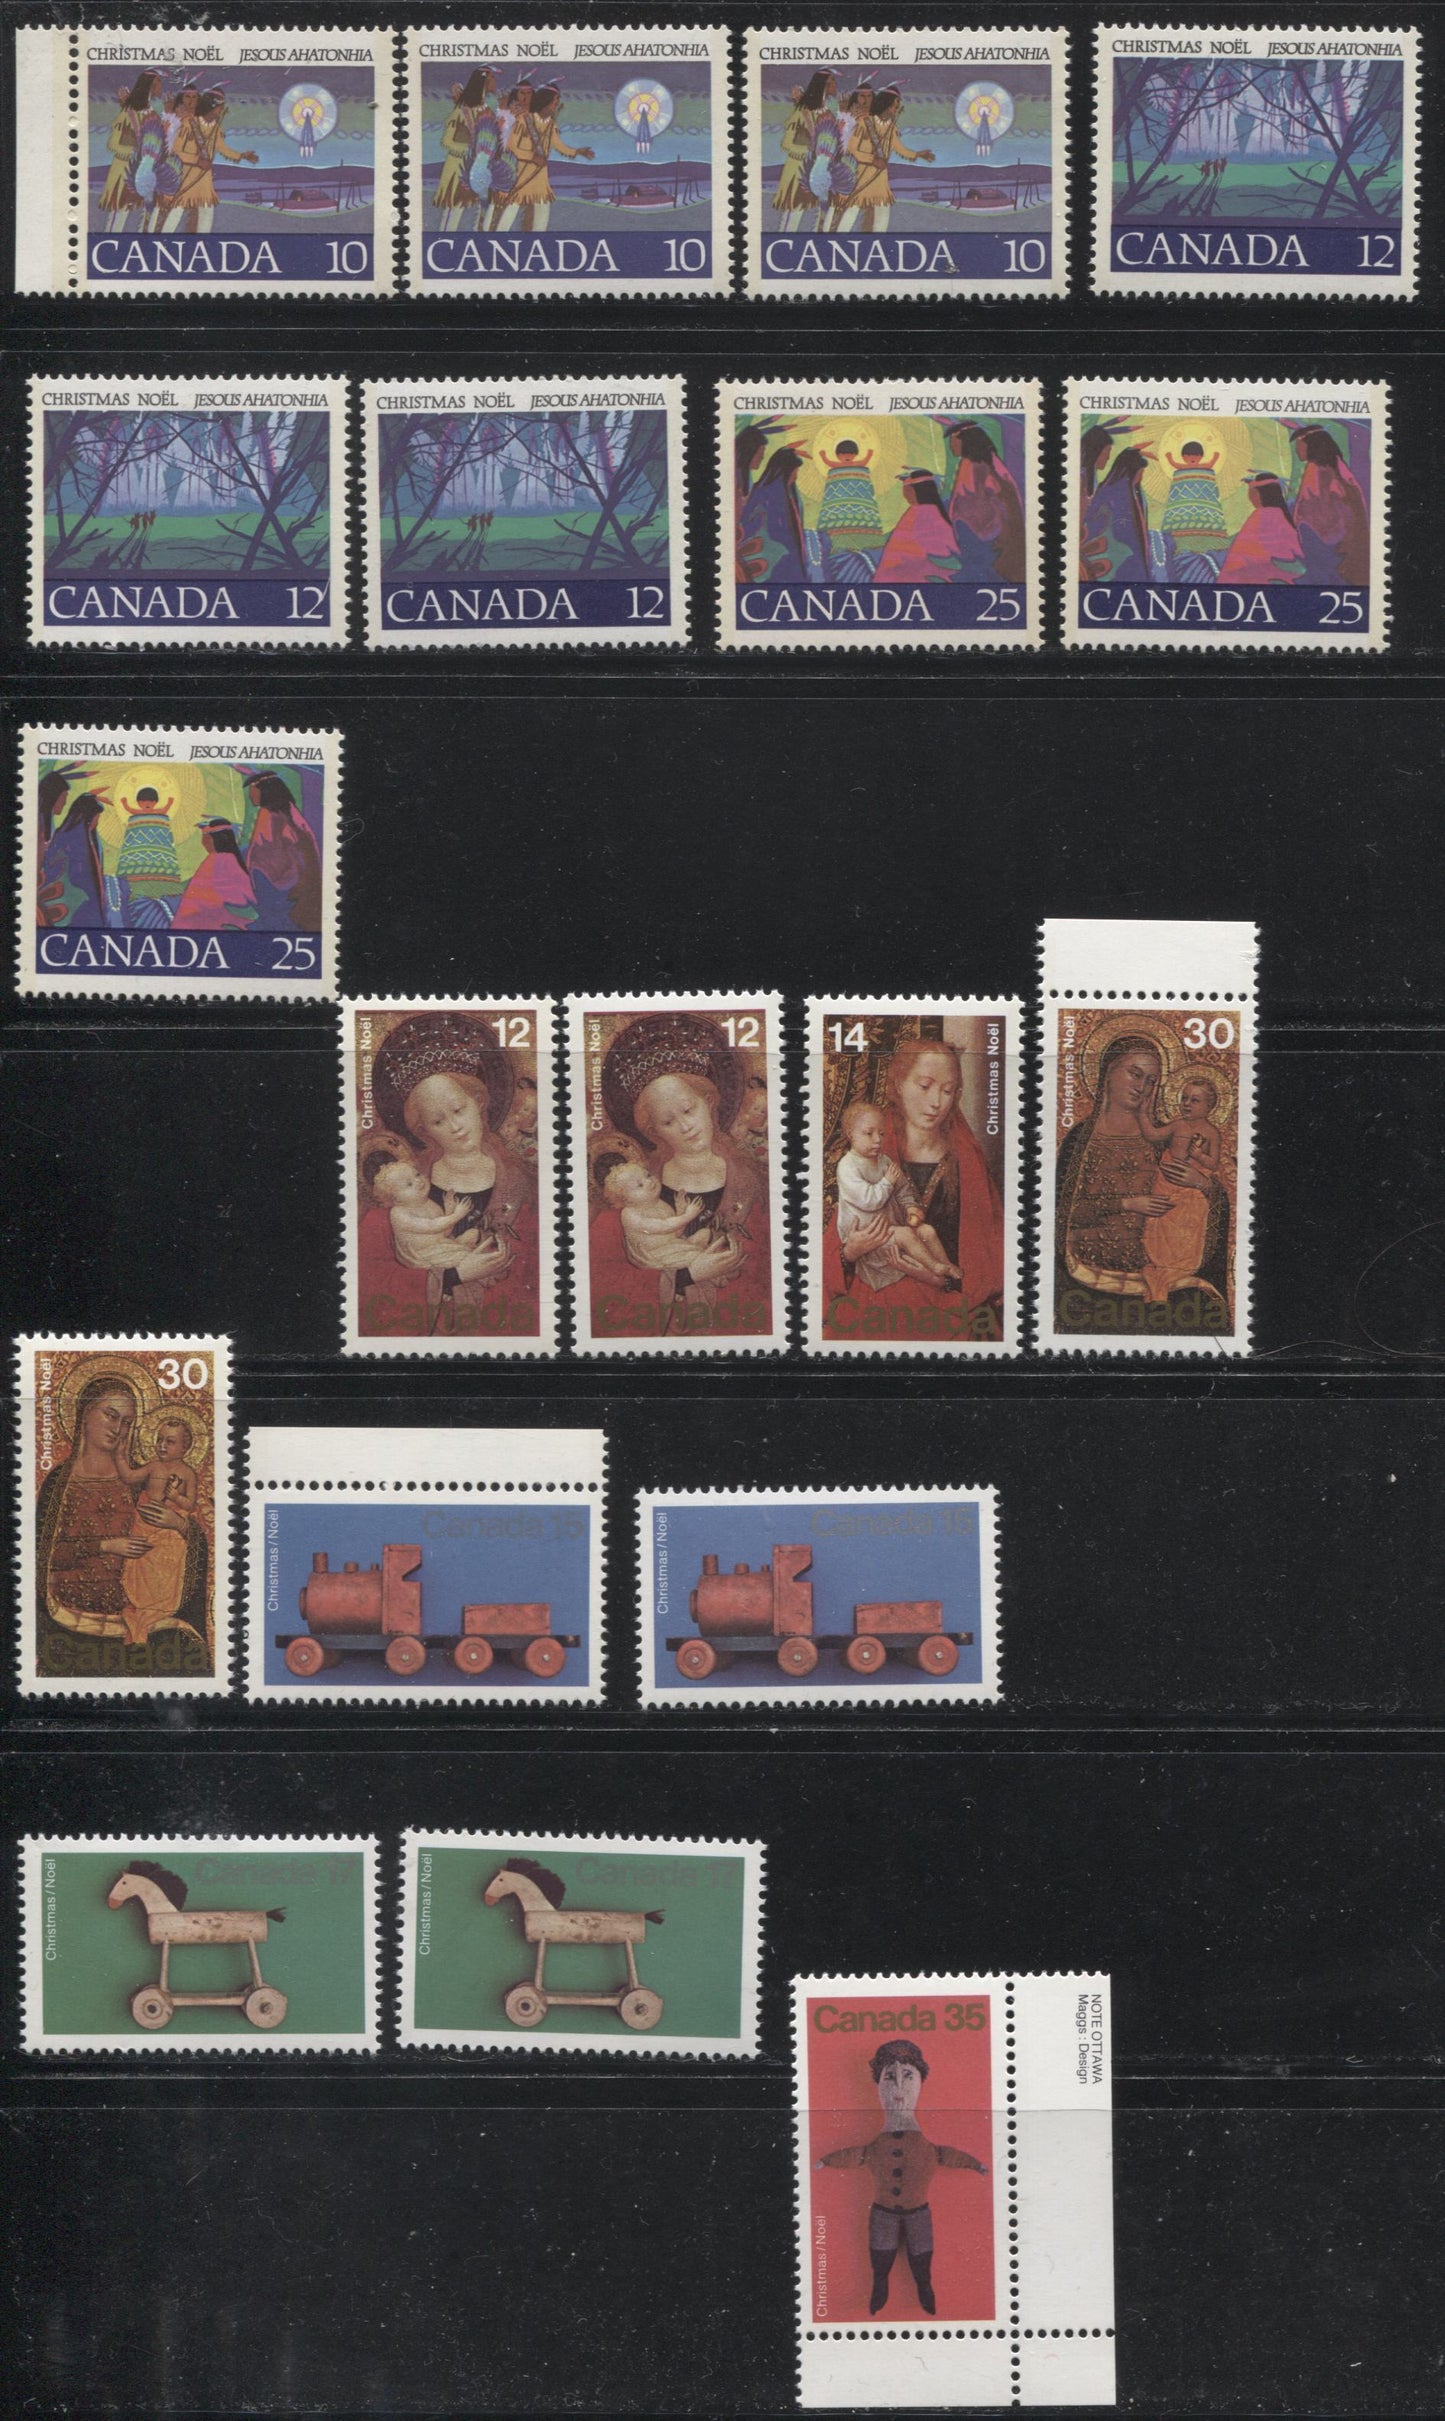 Lot 199 Canada #741/841 1977-1979 Christmas Issues - A Specialized Lot of 19 VFNH Singles, With Different Paper Types